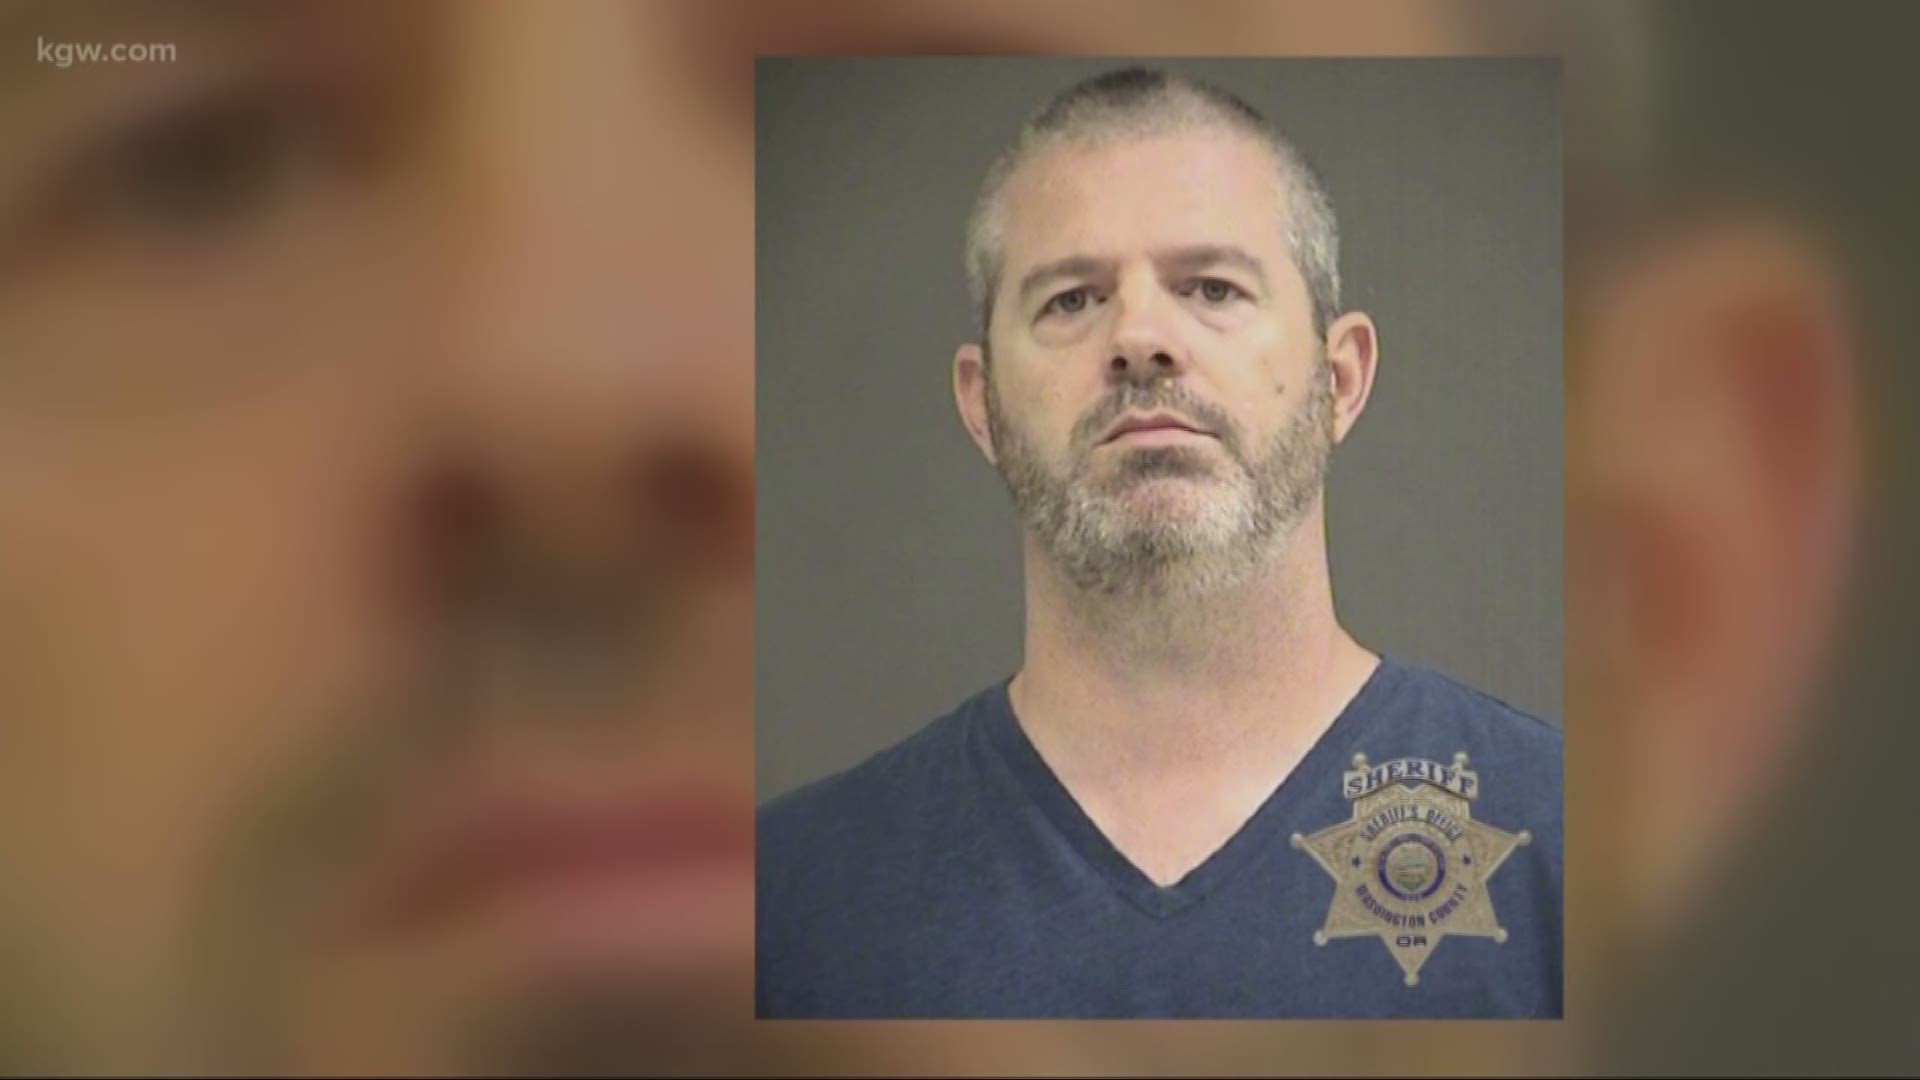 A former Multnomah County sheriff’s deputy, accused of sexually abusing a woman while off duty, will spend no time behind bars and won’t have to register as a sex offender. On Sunday, the victim spoke out.